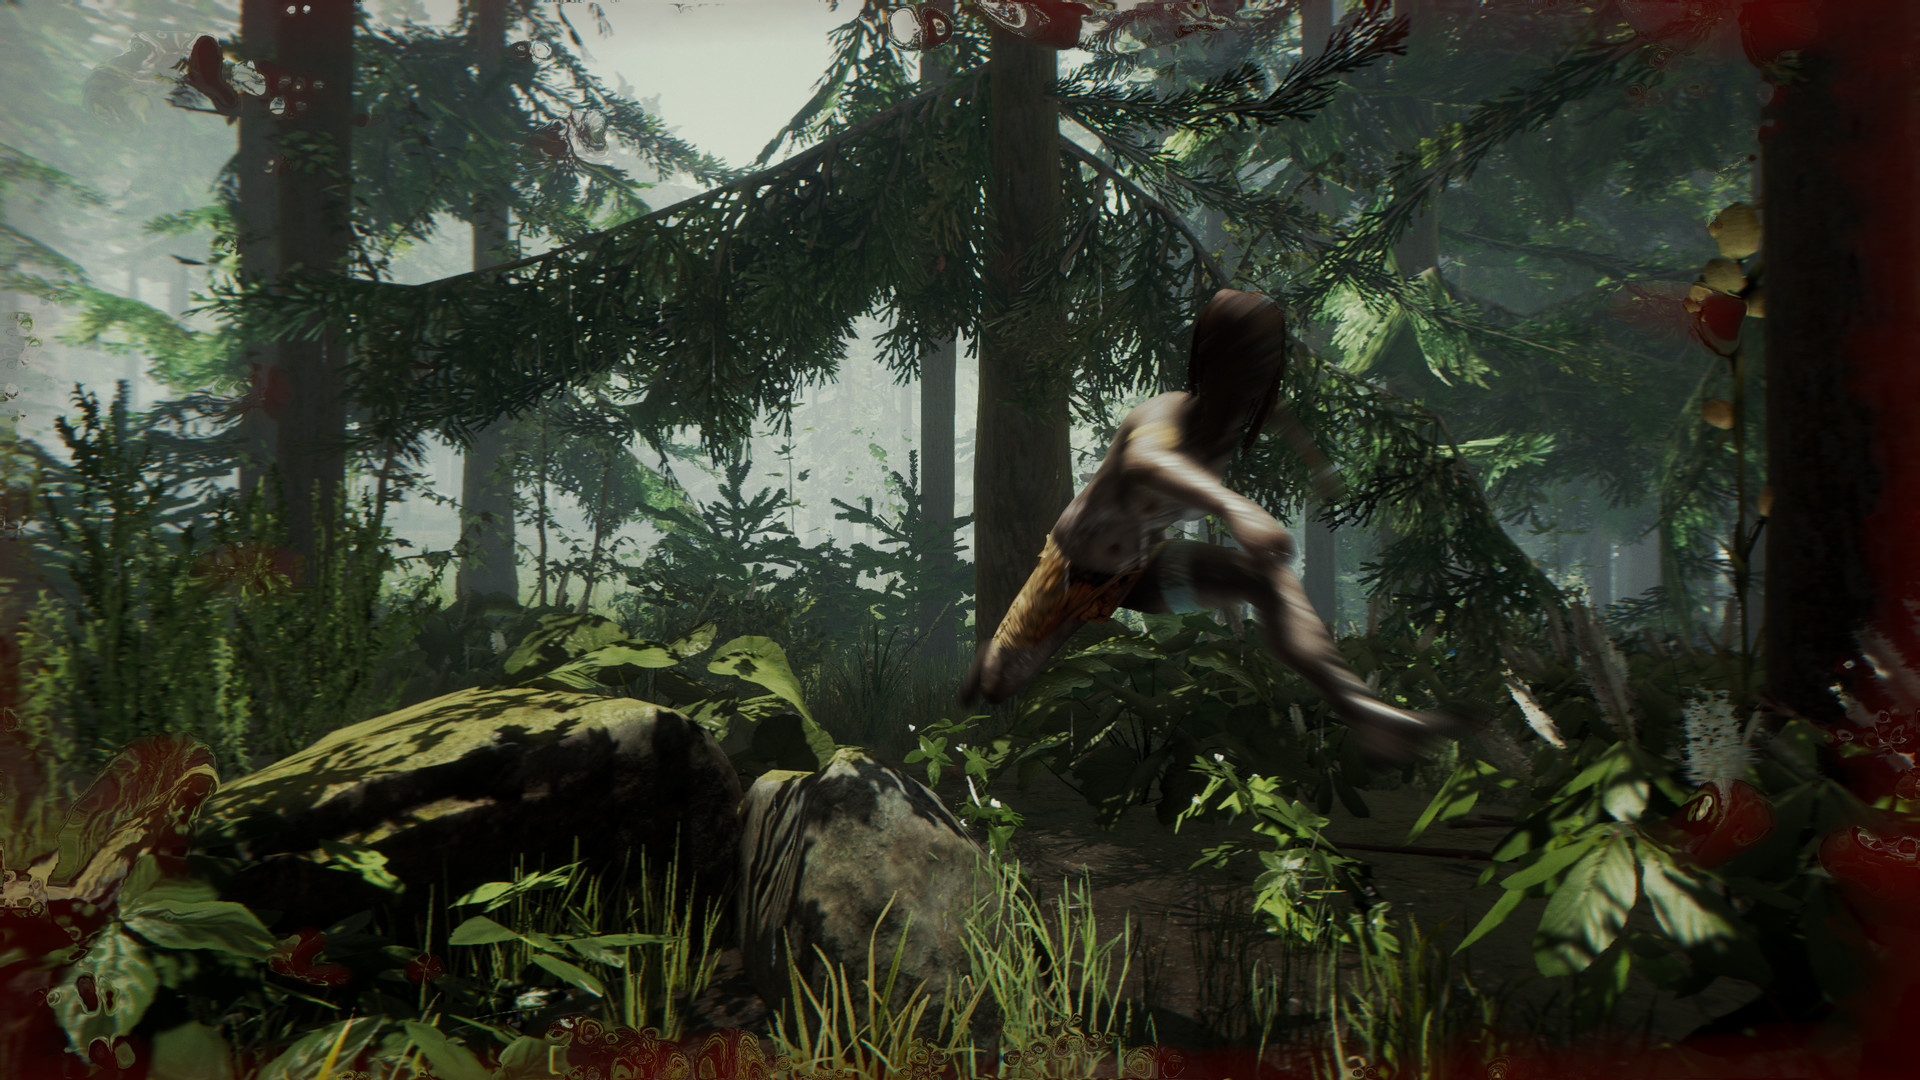 Sons of the Forest: Early Access Steam Rating 